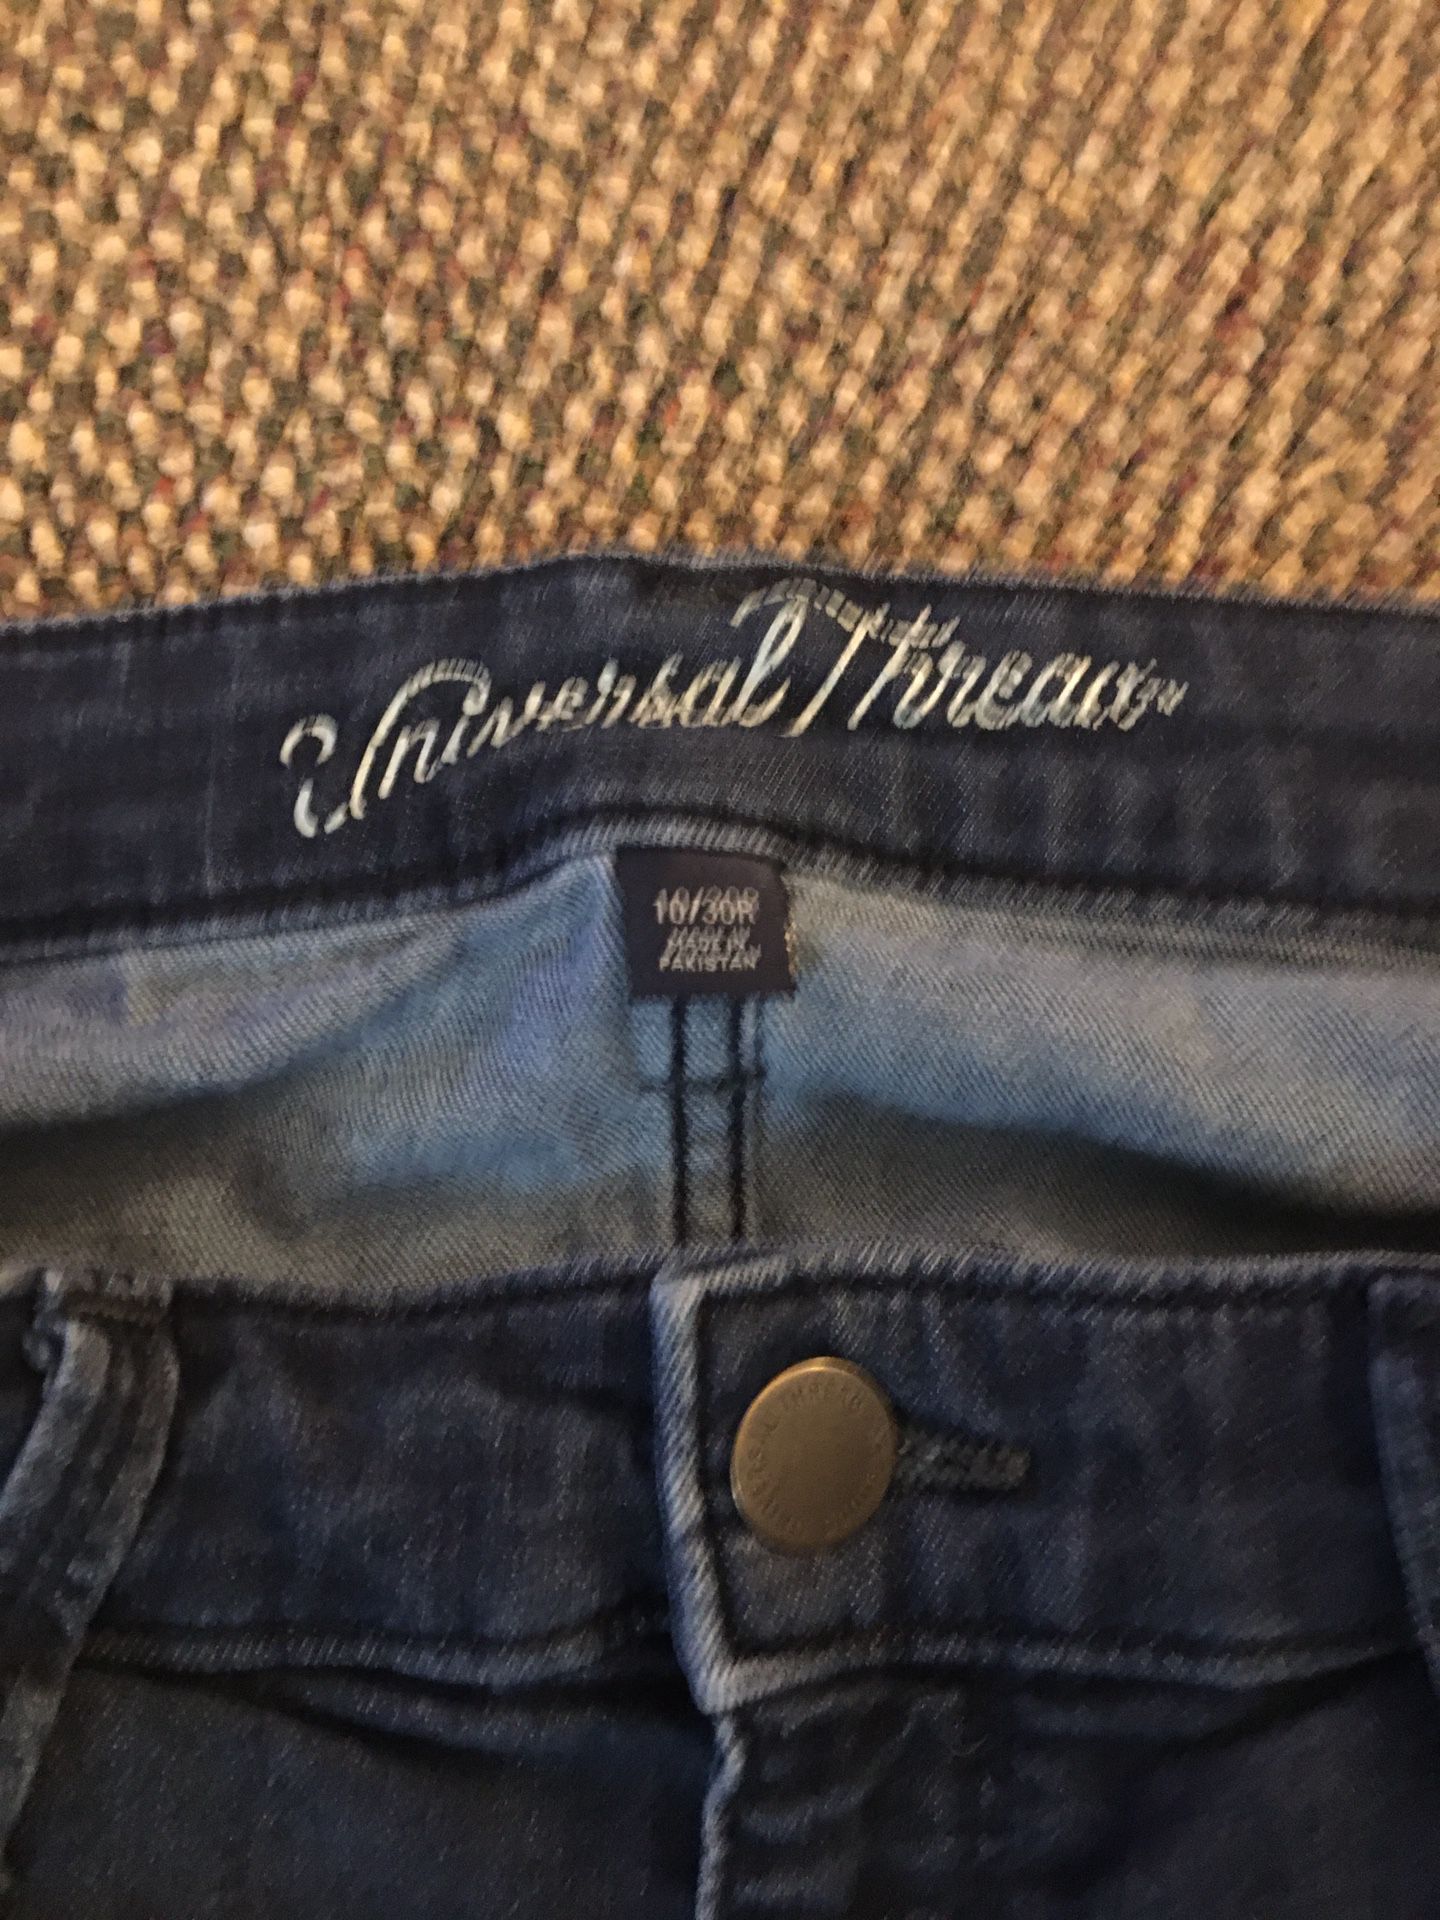 Universal thread Woman’s Jeans, Size 10